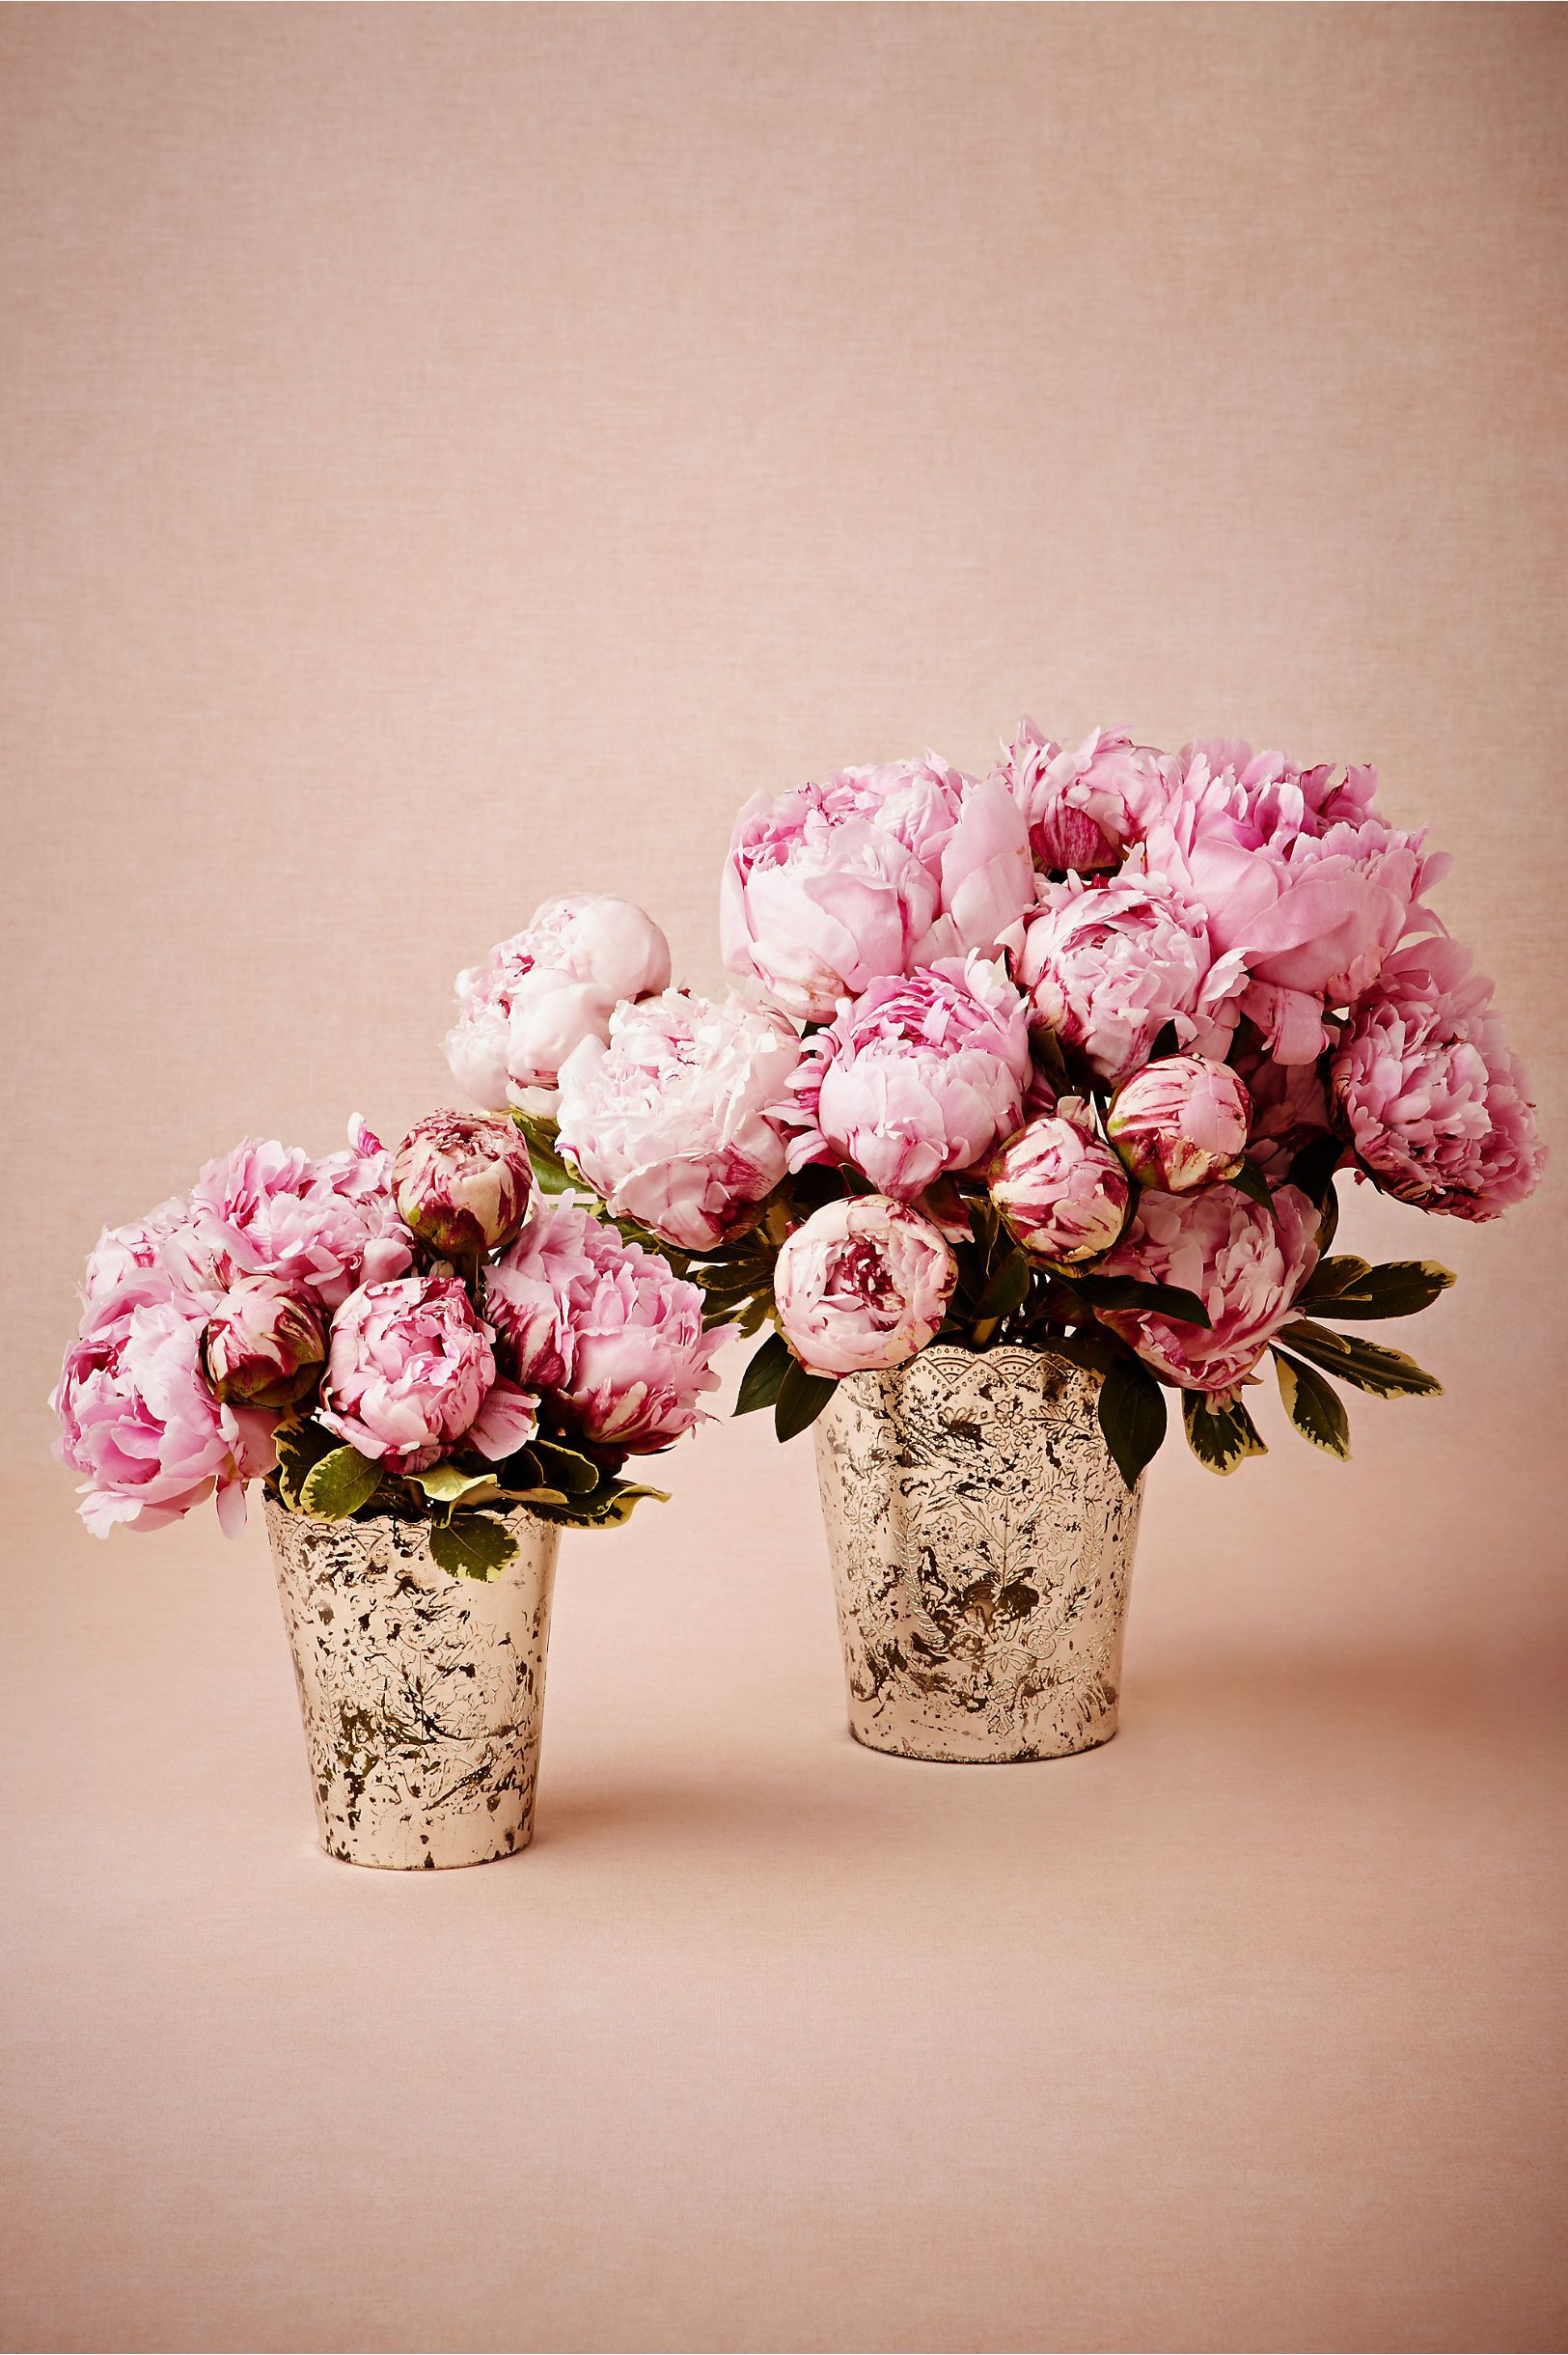 10 Stylish Hot Pink Flower Vases 2024 free download hot pink flower vases of tracing botany vase in dacor centerpieces at bhldn wedding with regard to bright a pink peonies in mercury vases tracing botany vase from bhldn